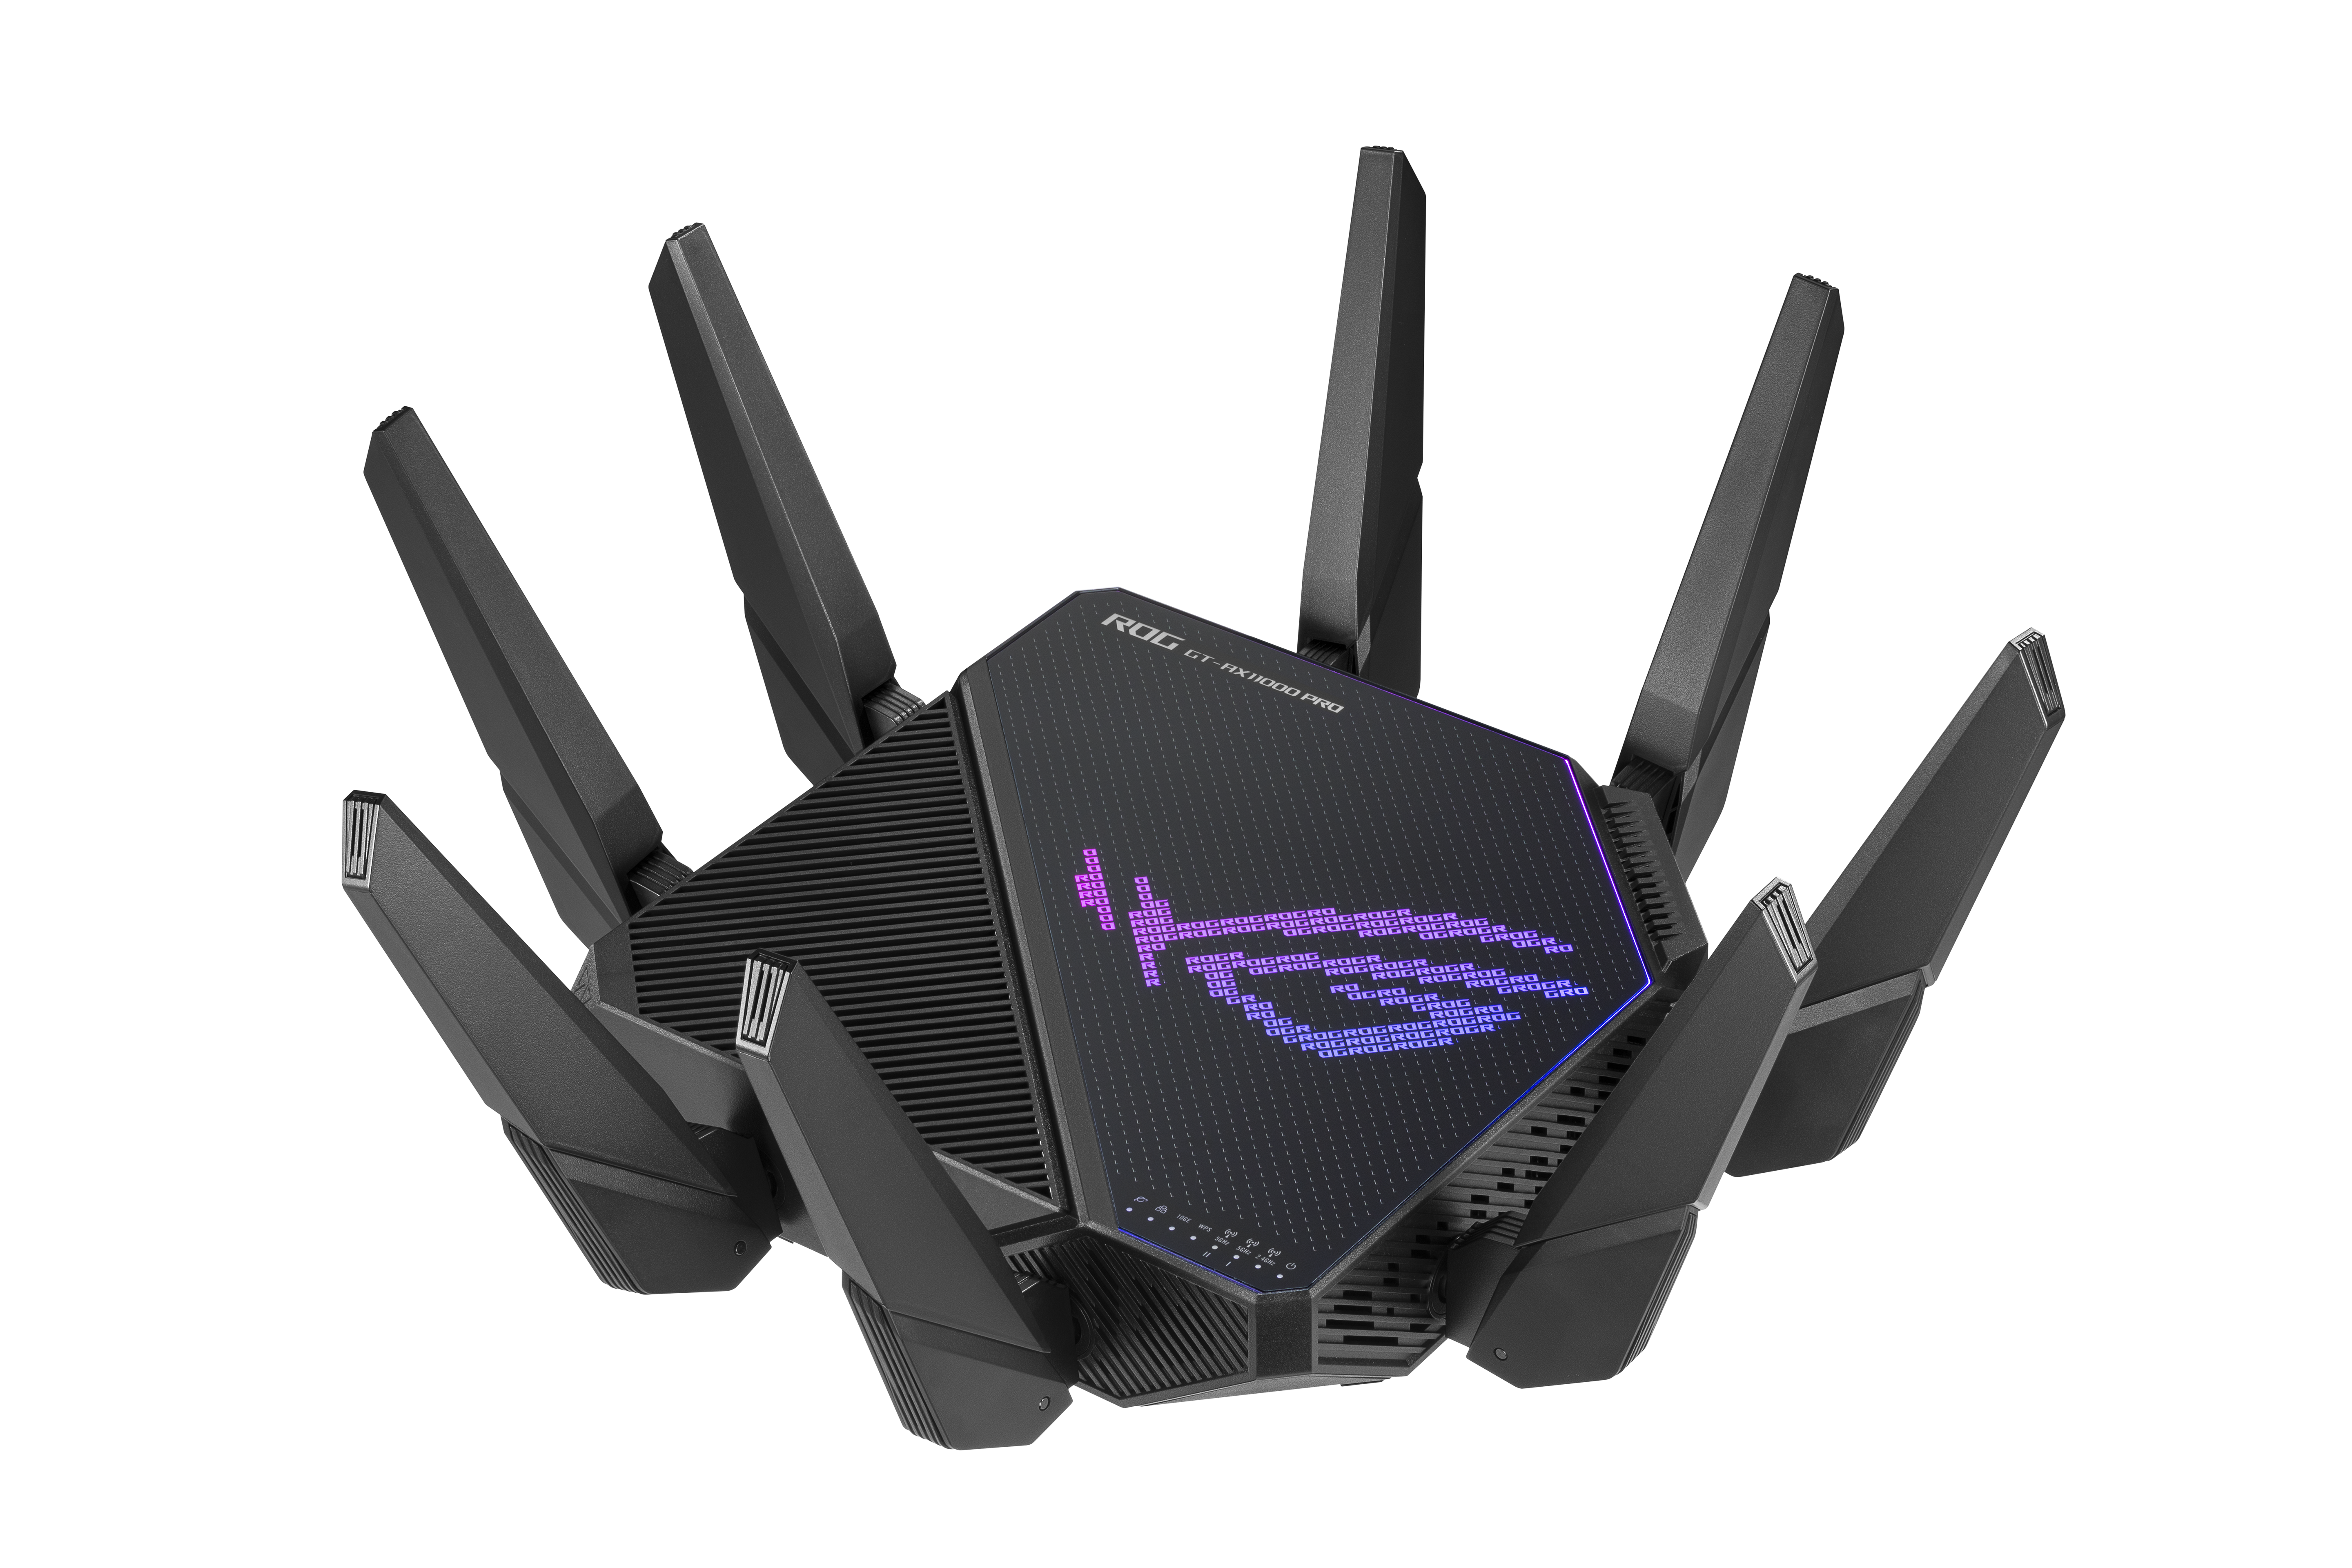 Asus ROG Rapture GT-AX11000 Pro Tri-Band WiFi 6 gaming router